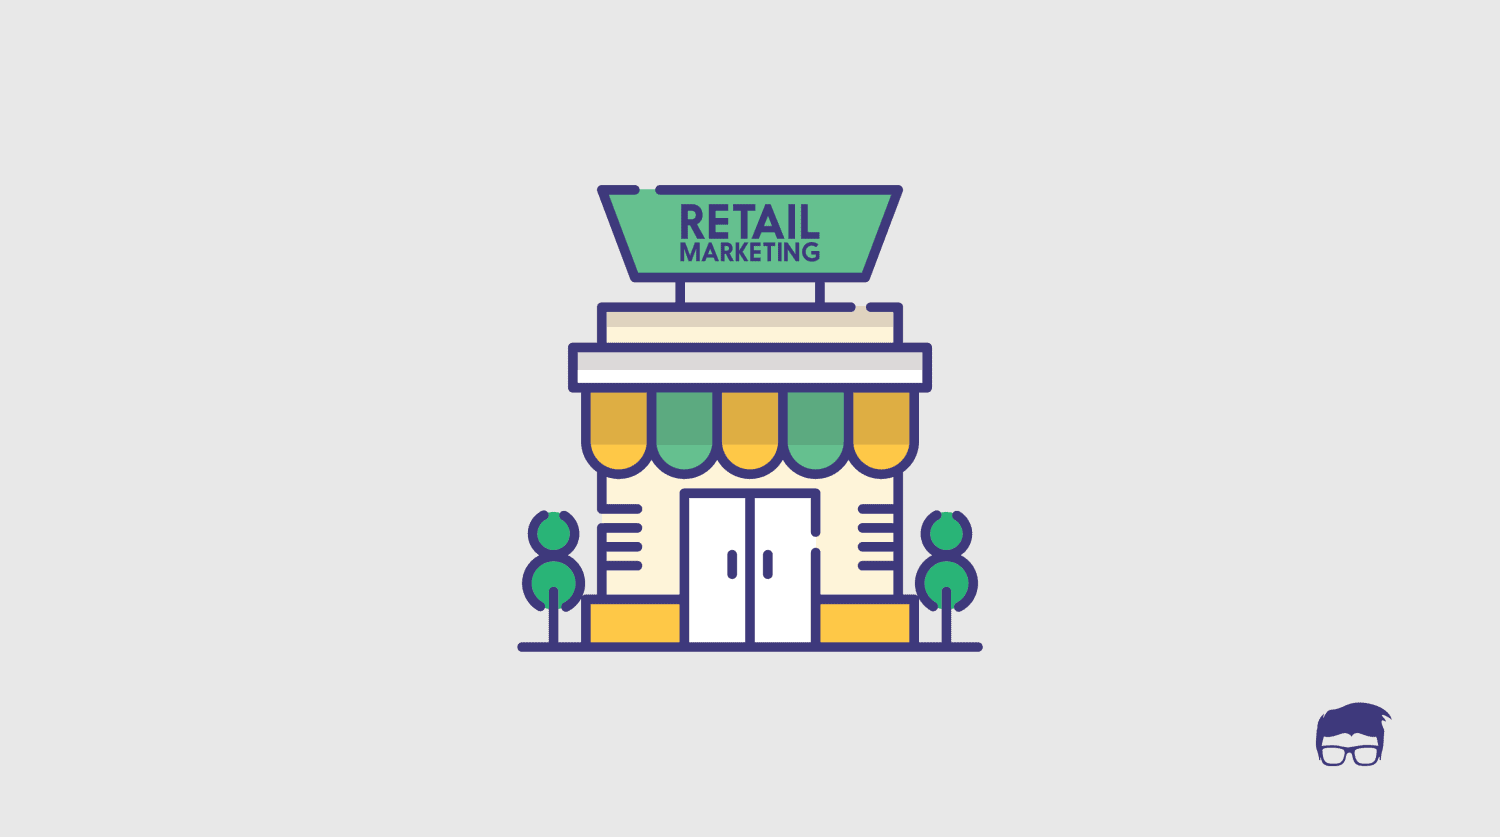 What Is Retail Marketing? - Functions, Importance, Strategies